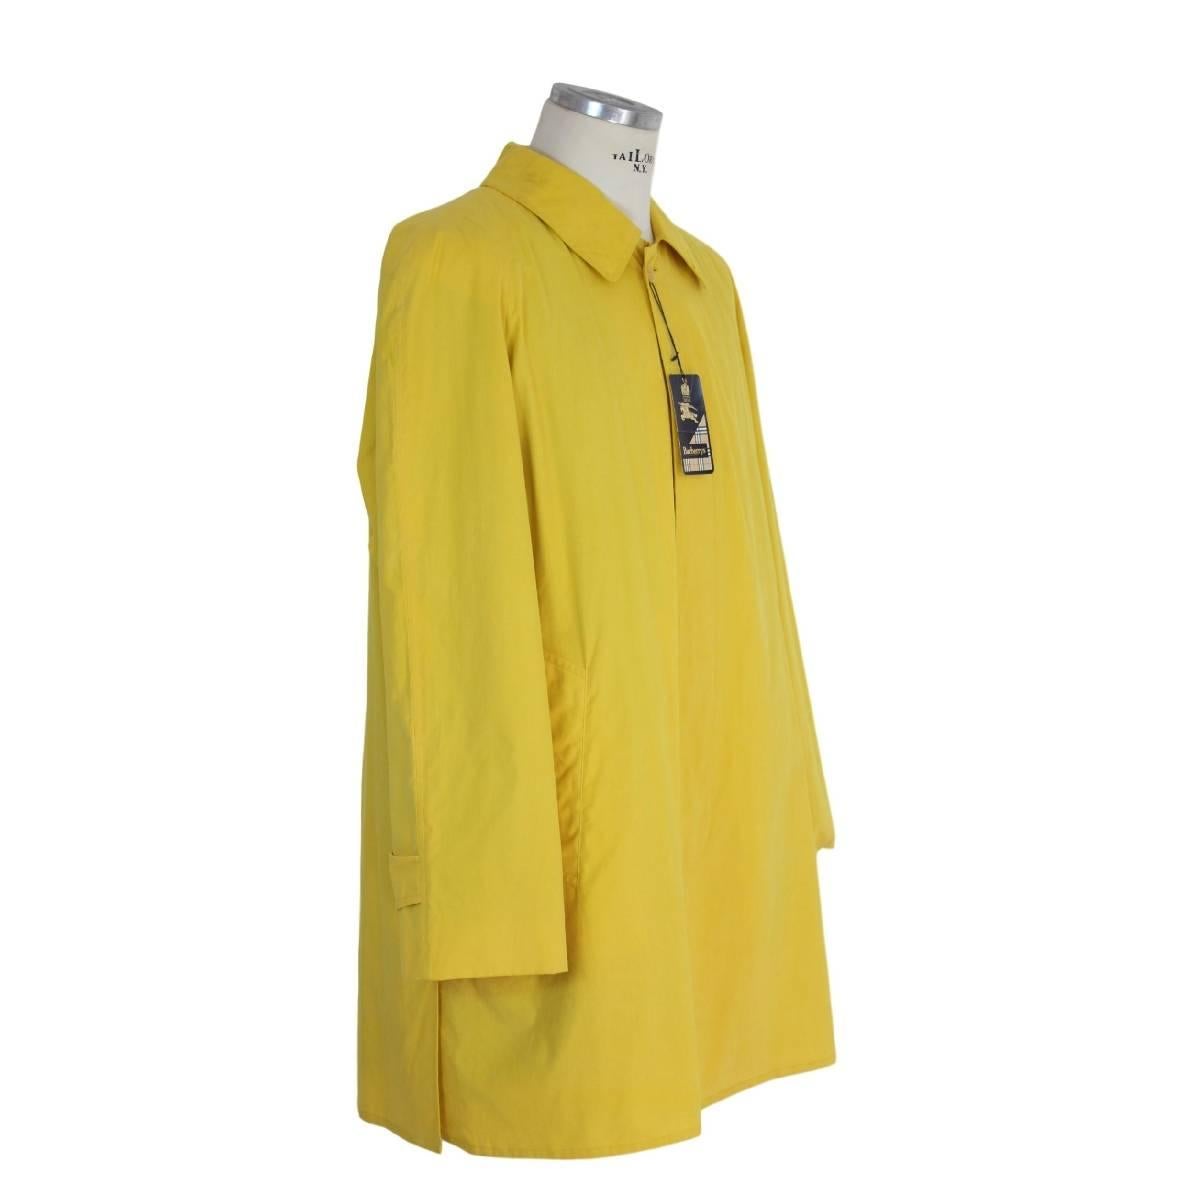 Yellow Nwt Burberry vintage yellow cotton wool coat men’s trench Collington size 50 it 